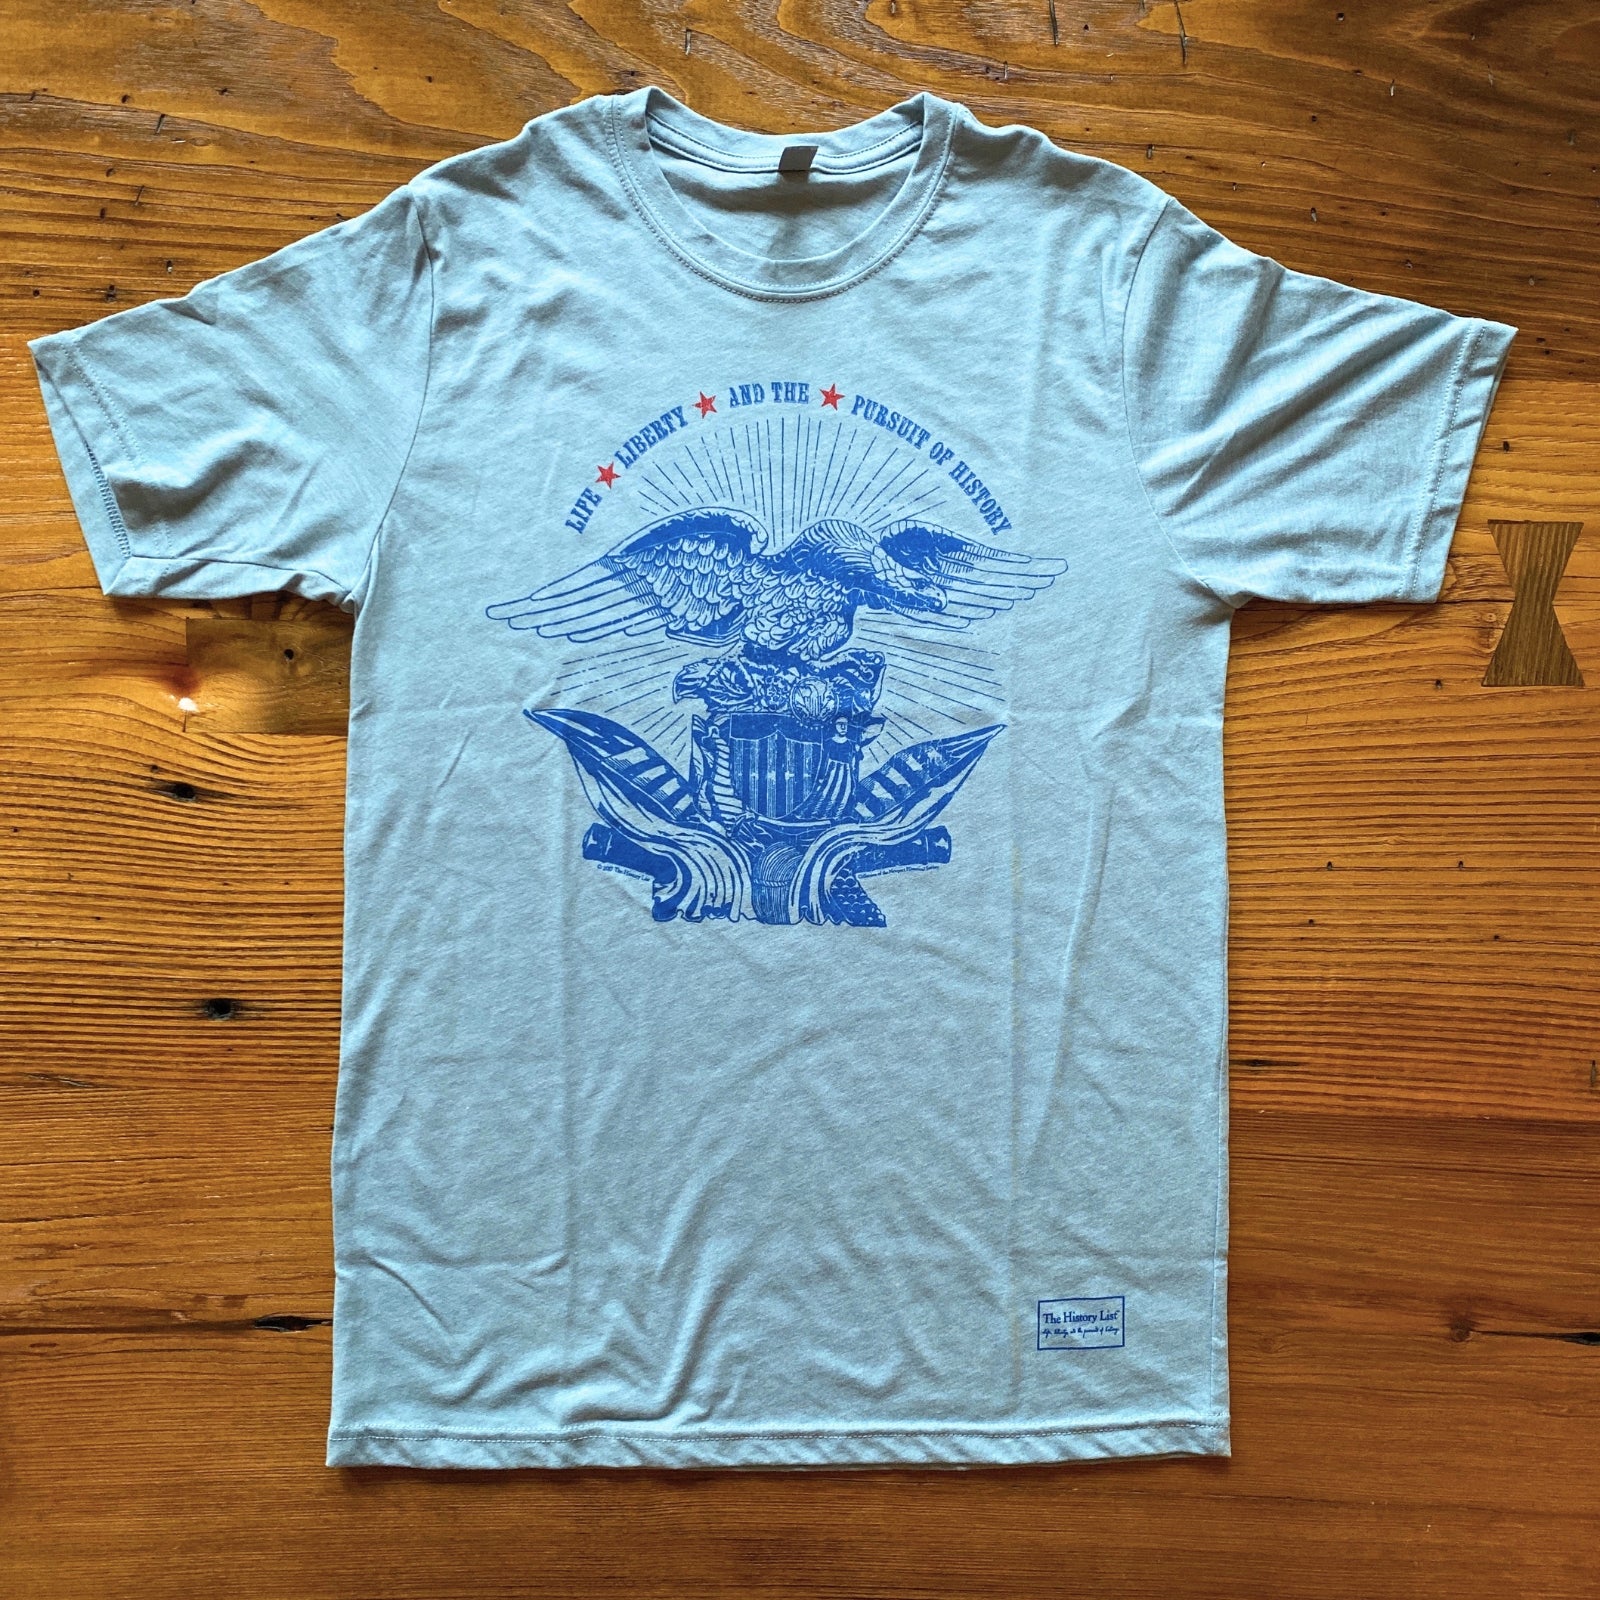 Light blue heather of the "Life, liberty, and the pursuit of history" T-Shirt from The History List store